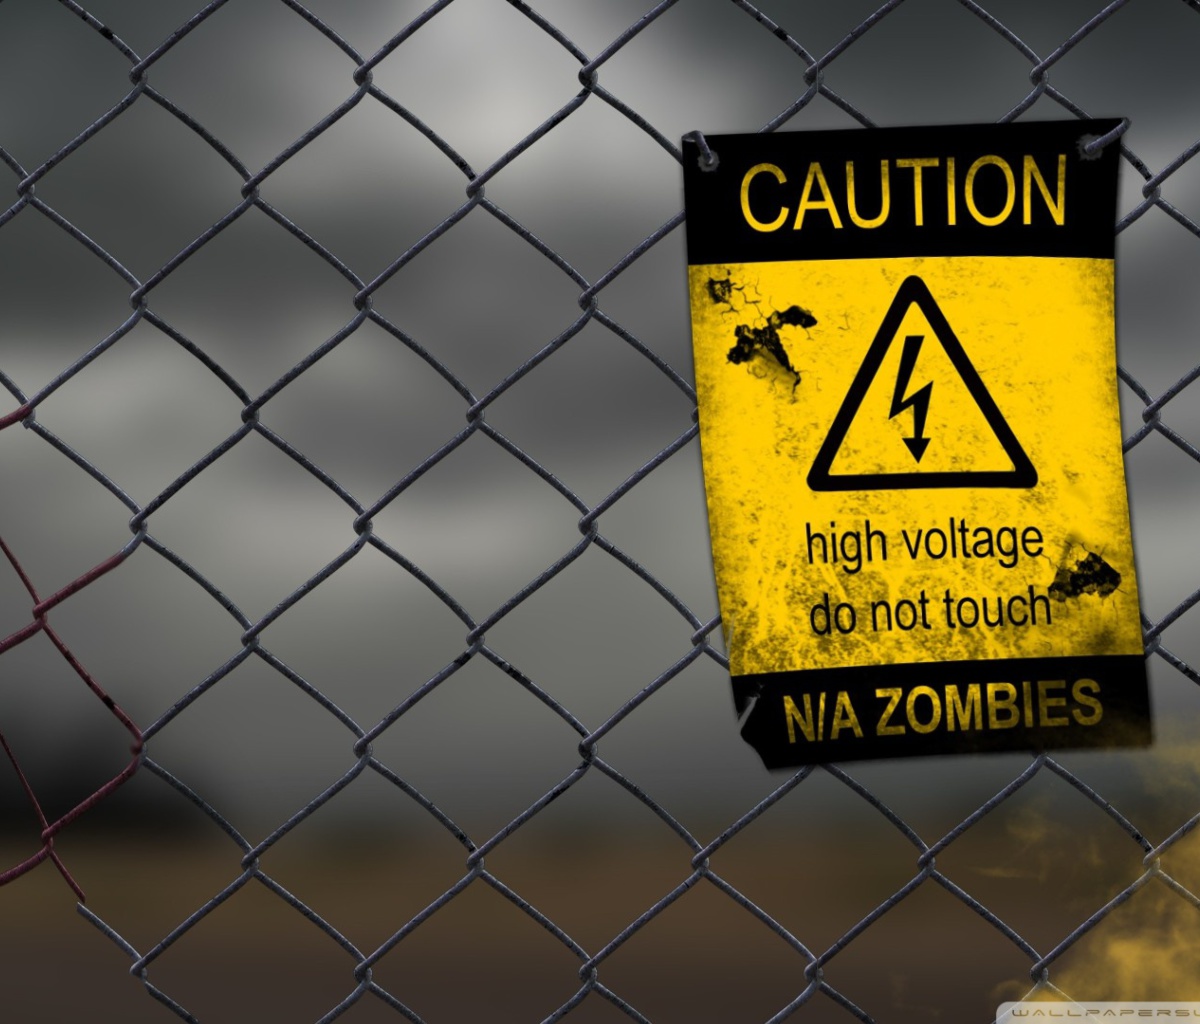 Caution Zombies, High voltage do not touch screenshot #1 1200x1024